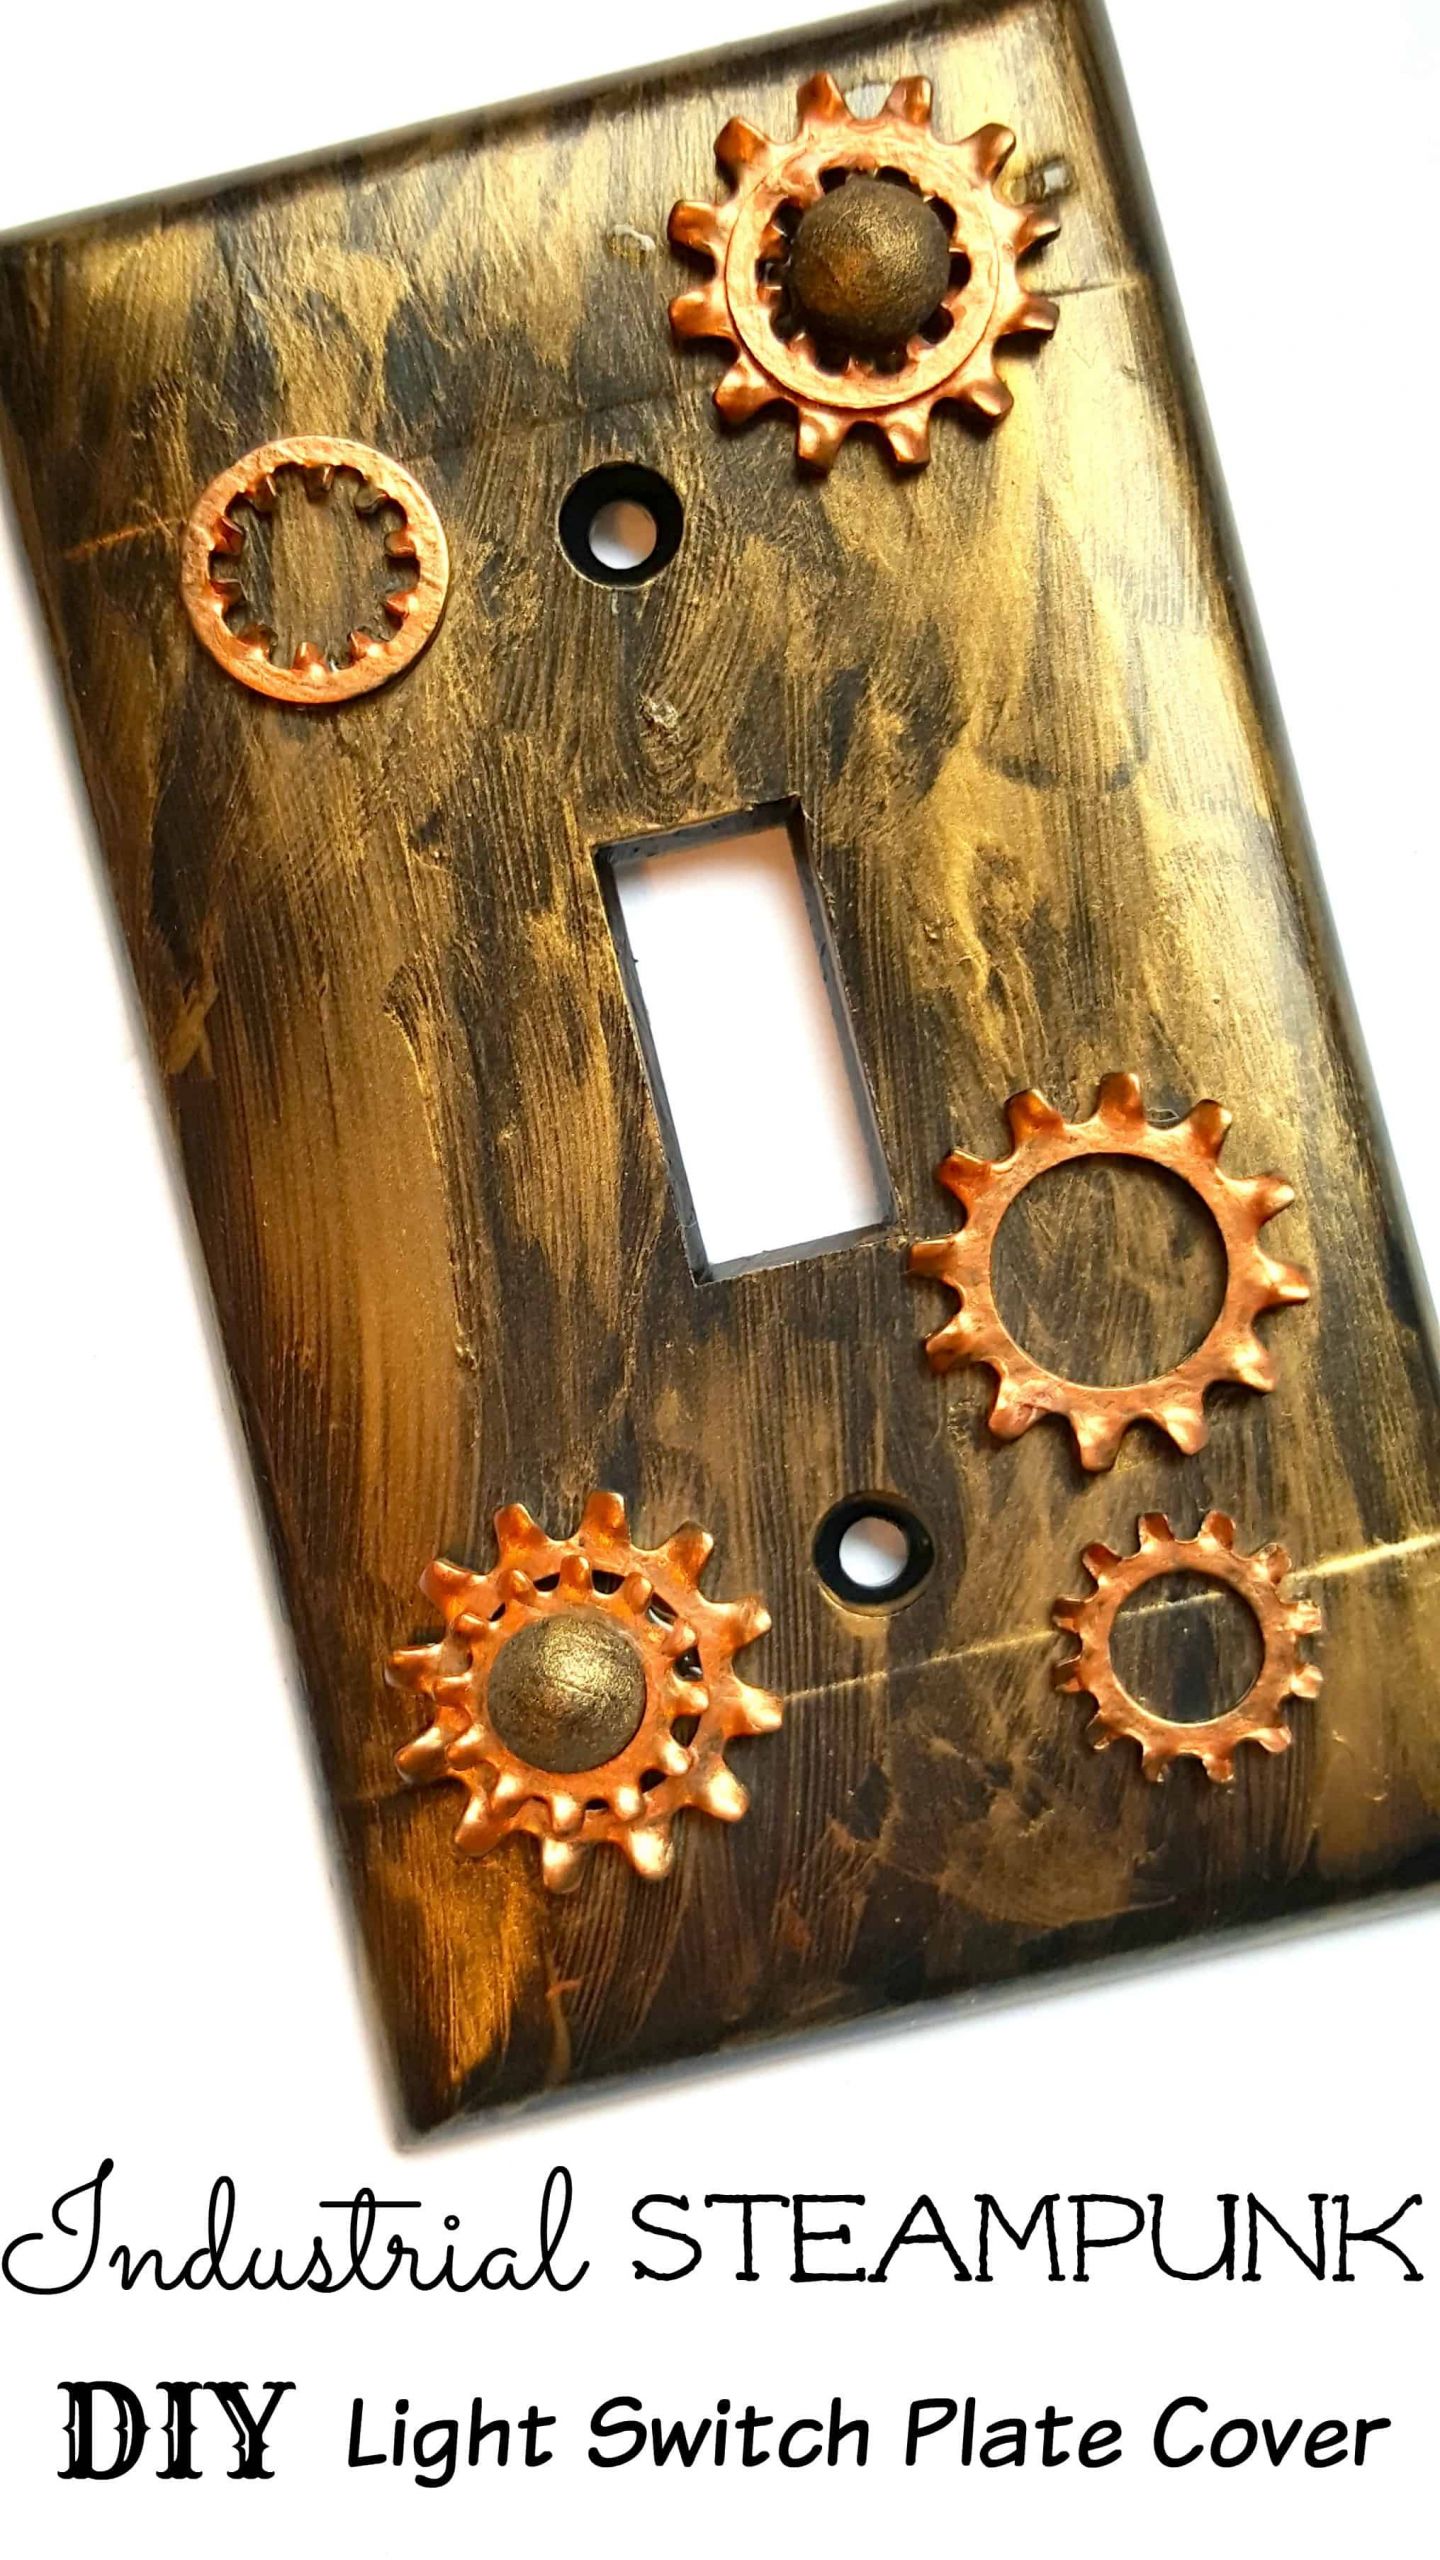 Steampunk DIY Decor
 Industrial Steampunk Light Switch Plate Cover DIY Home